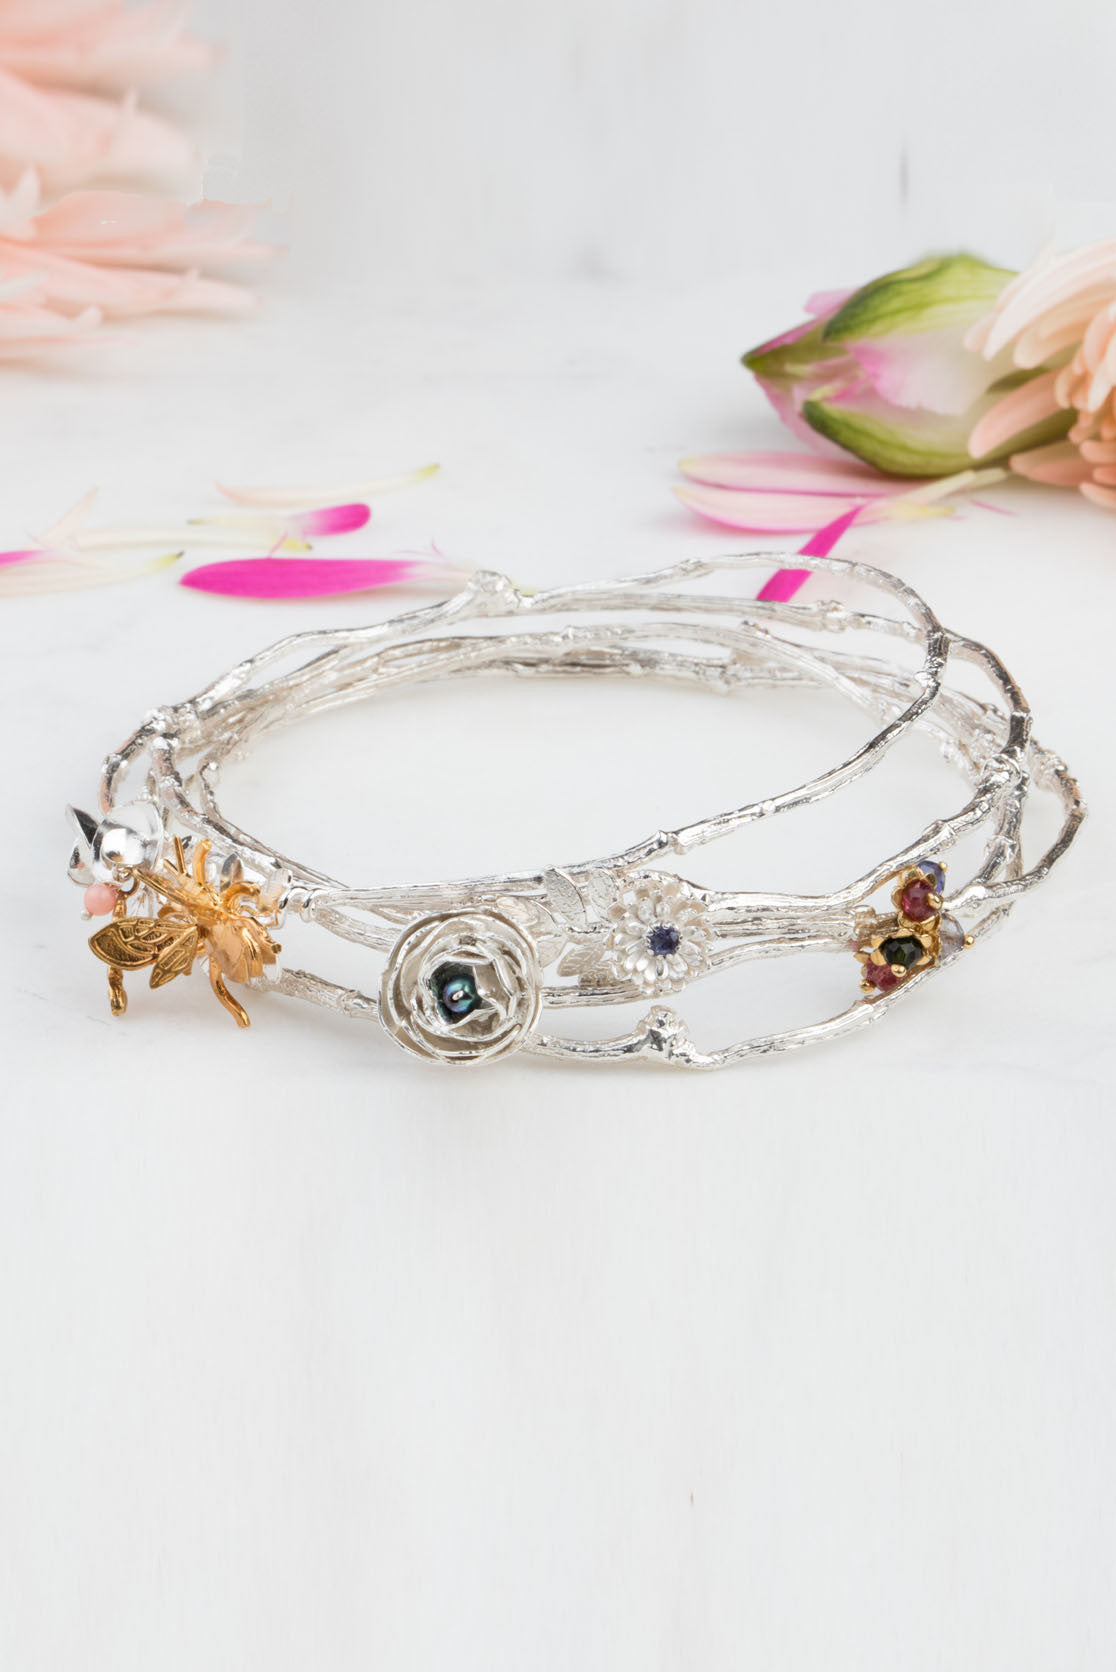 Forget-me-not Bangle